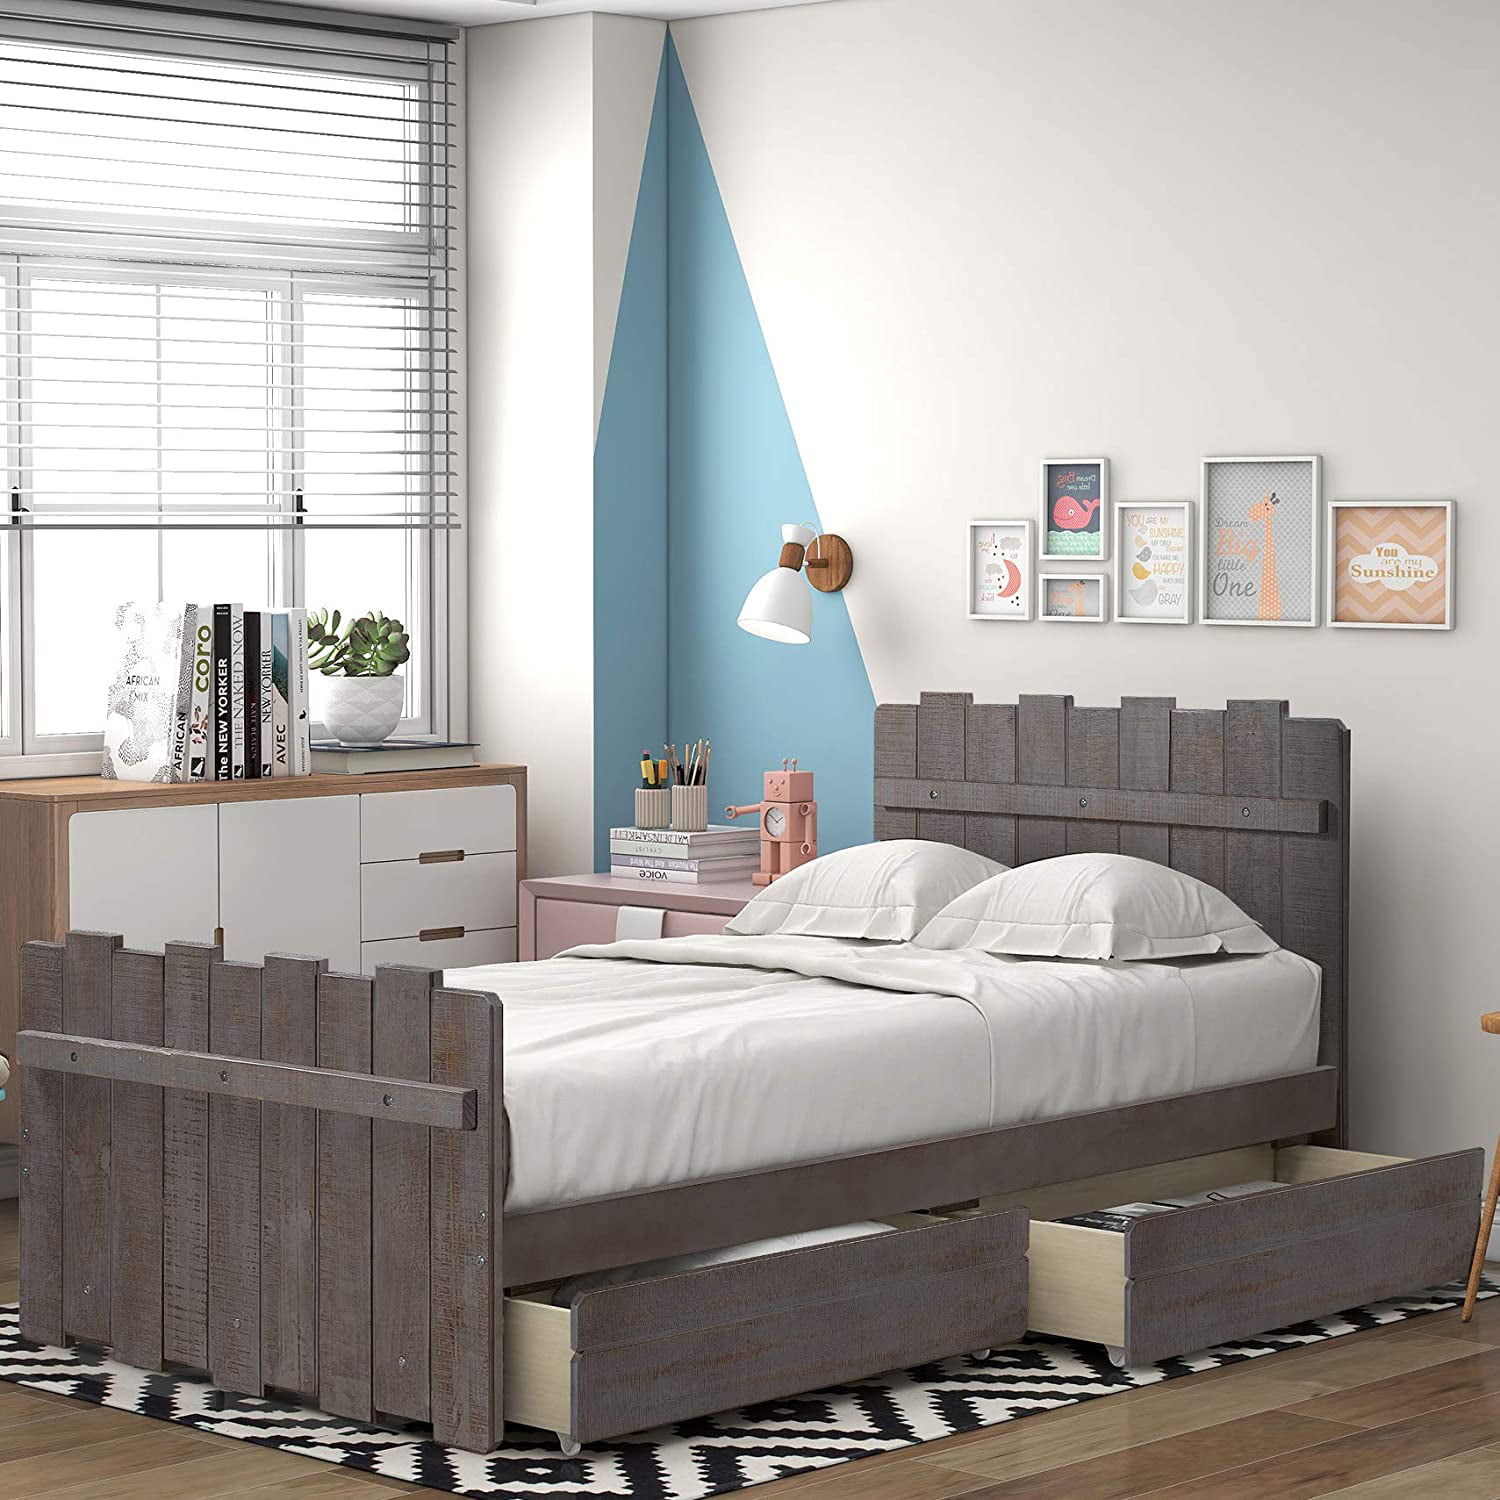 Drawers Rustic Style Twin Bed Frame, Distressed Gray Wood Headboard